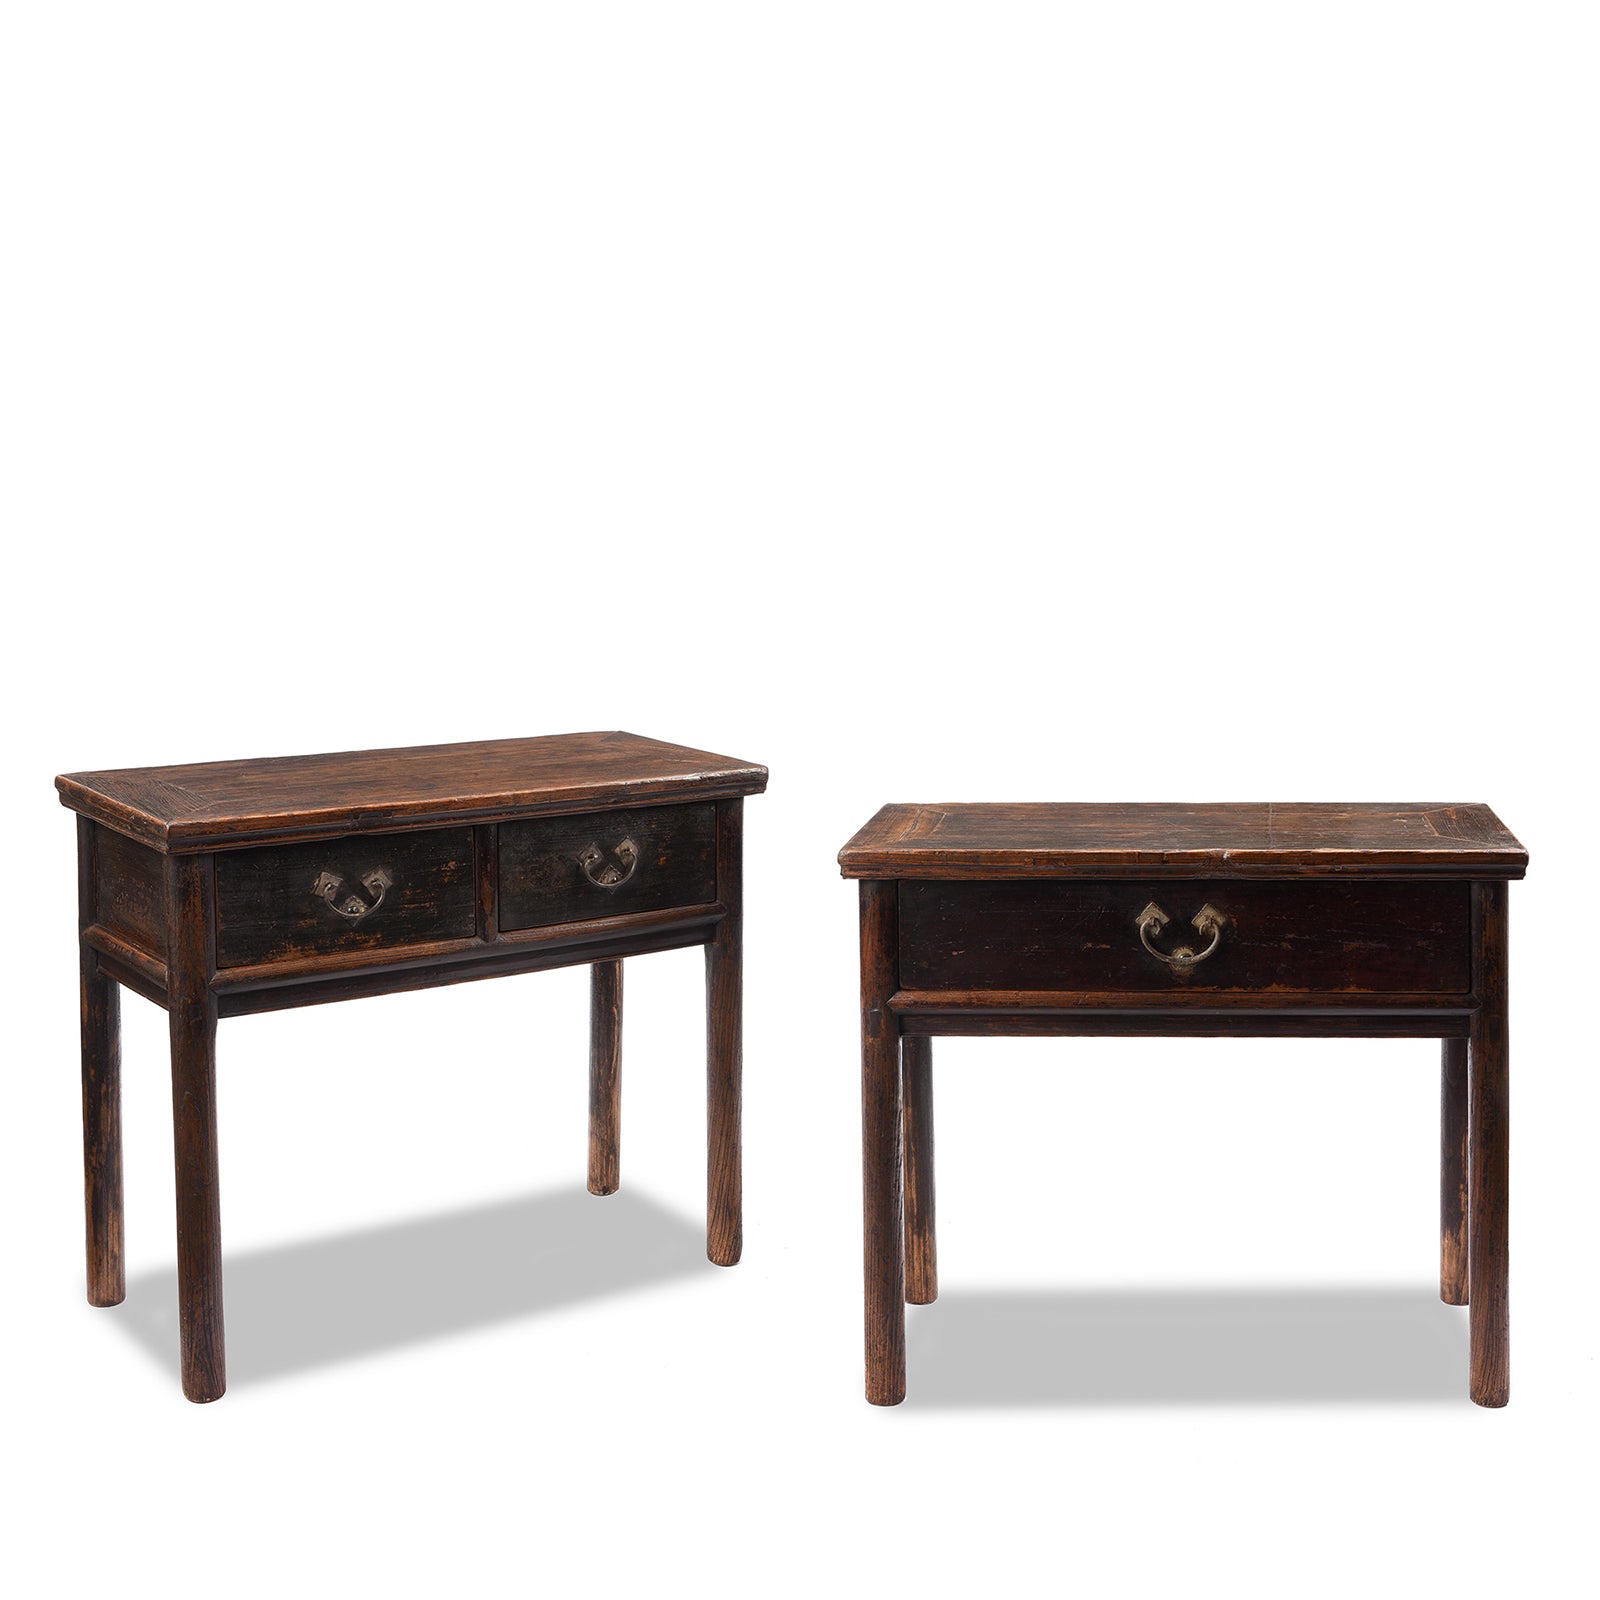 Pair of Antique Ming Style Chinese Drawer Half Tables From Shanxi | Indigo Antiques